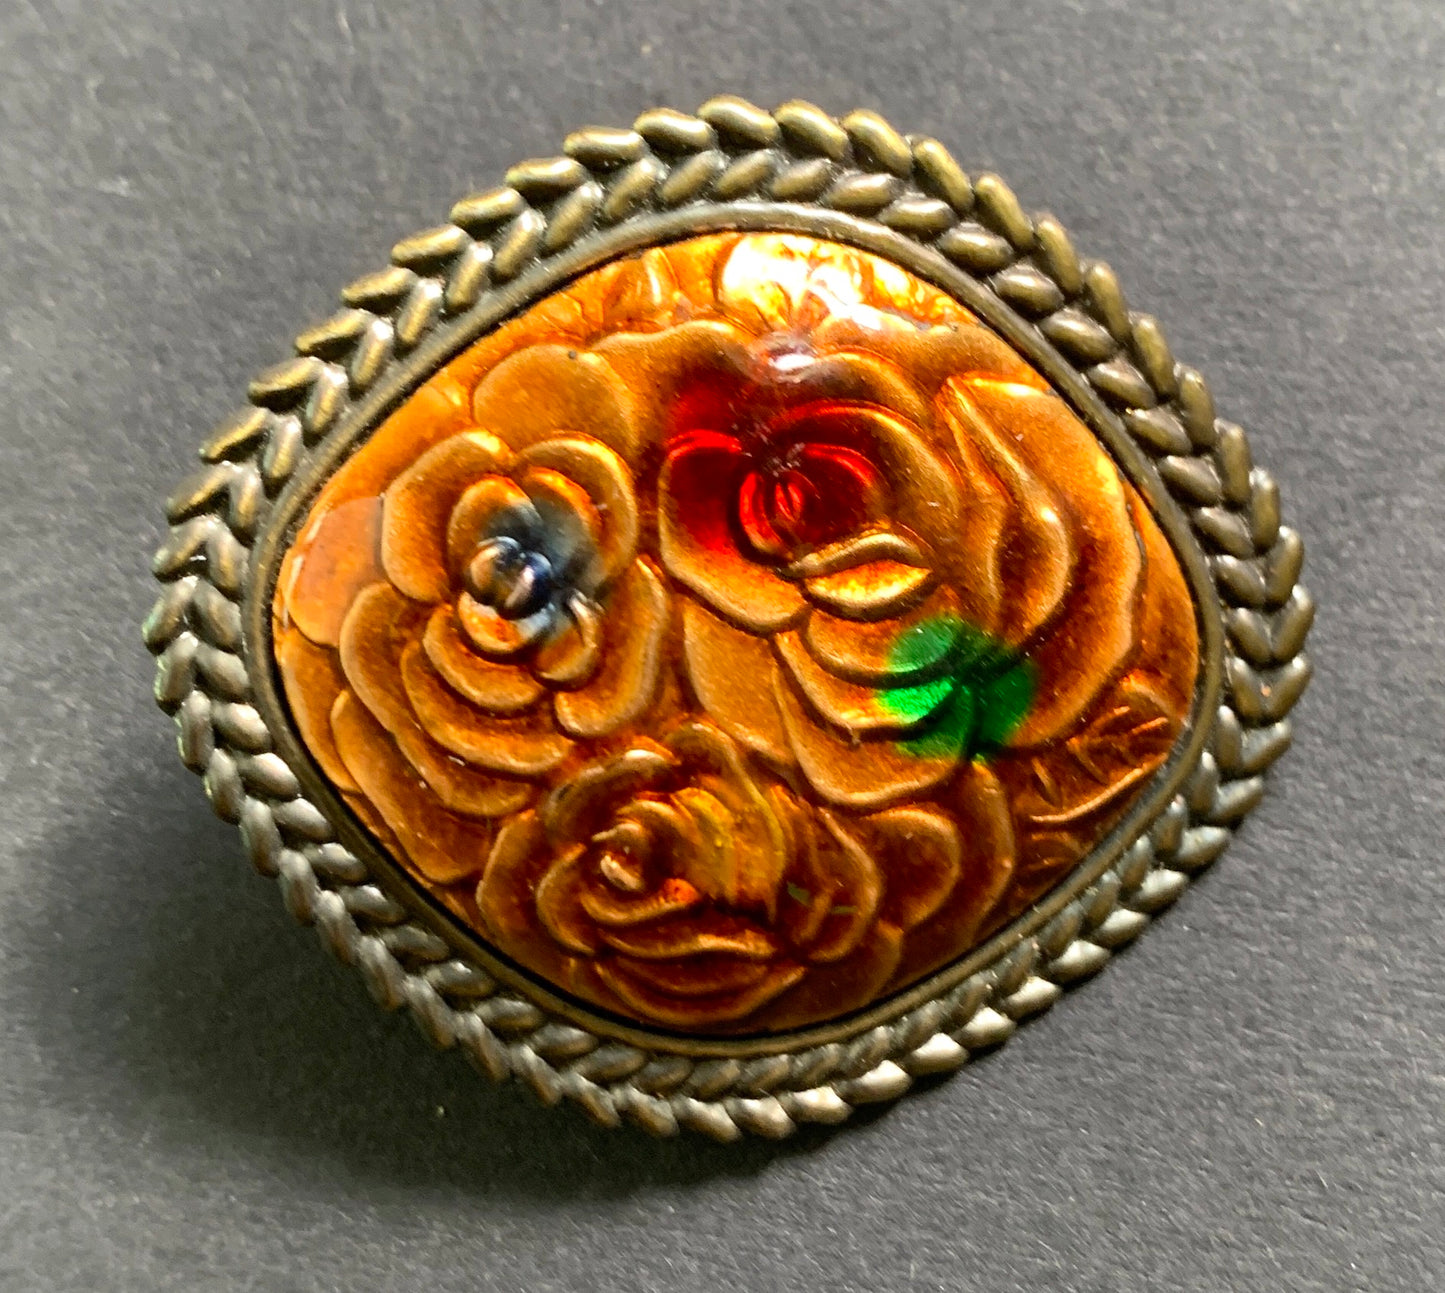 Exceptionally Autumnal 1980s Enamel Brooch